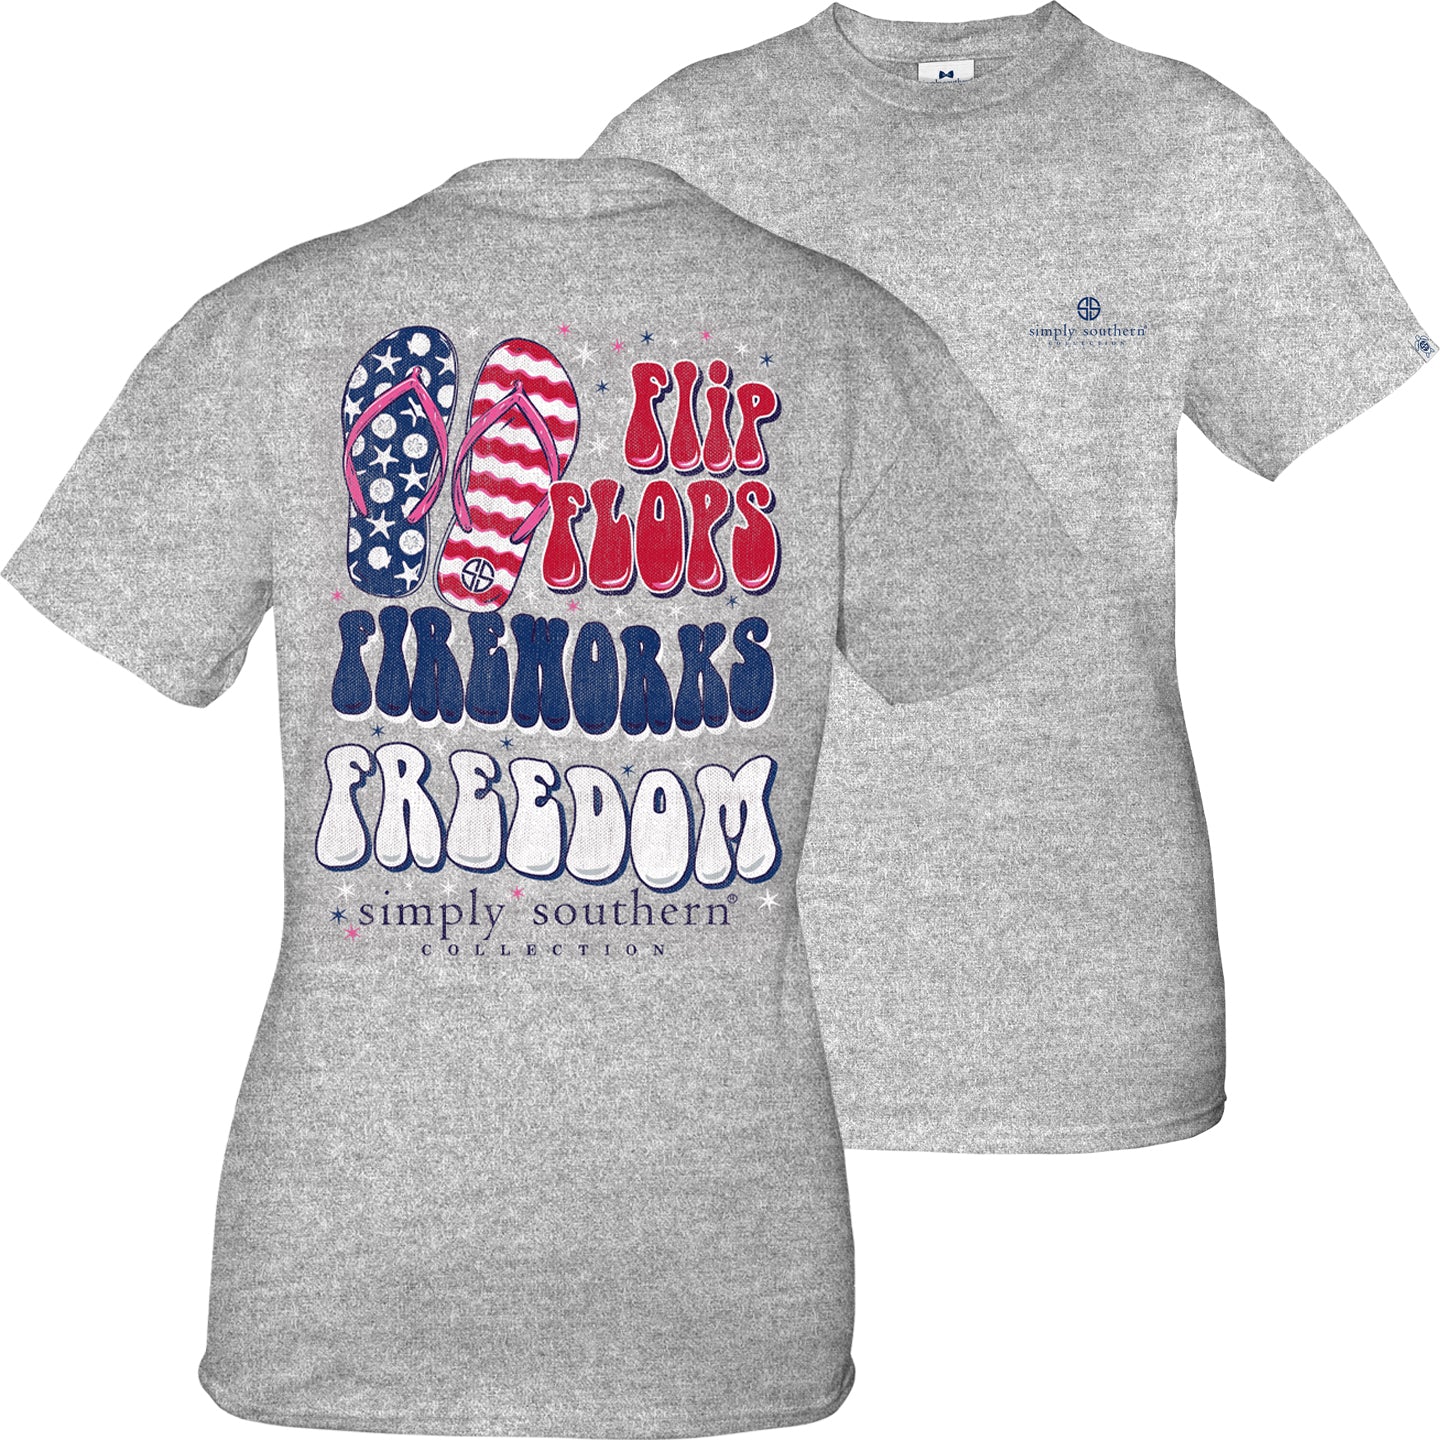 Youth 'Flip Flops, Fireworks, Freedom' Short Sleeve Tee by Simply Southern